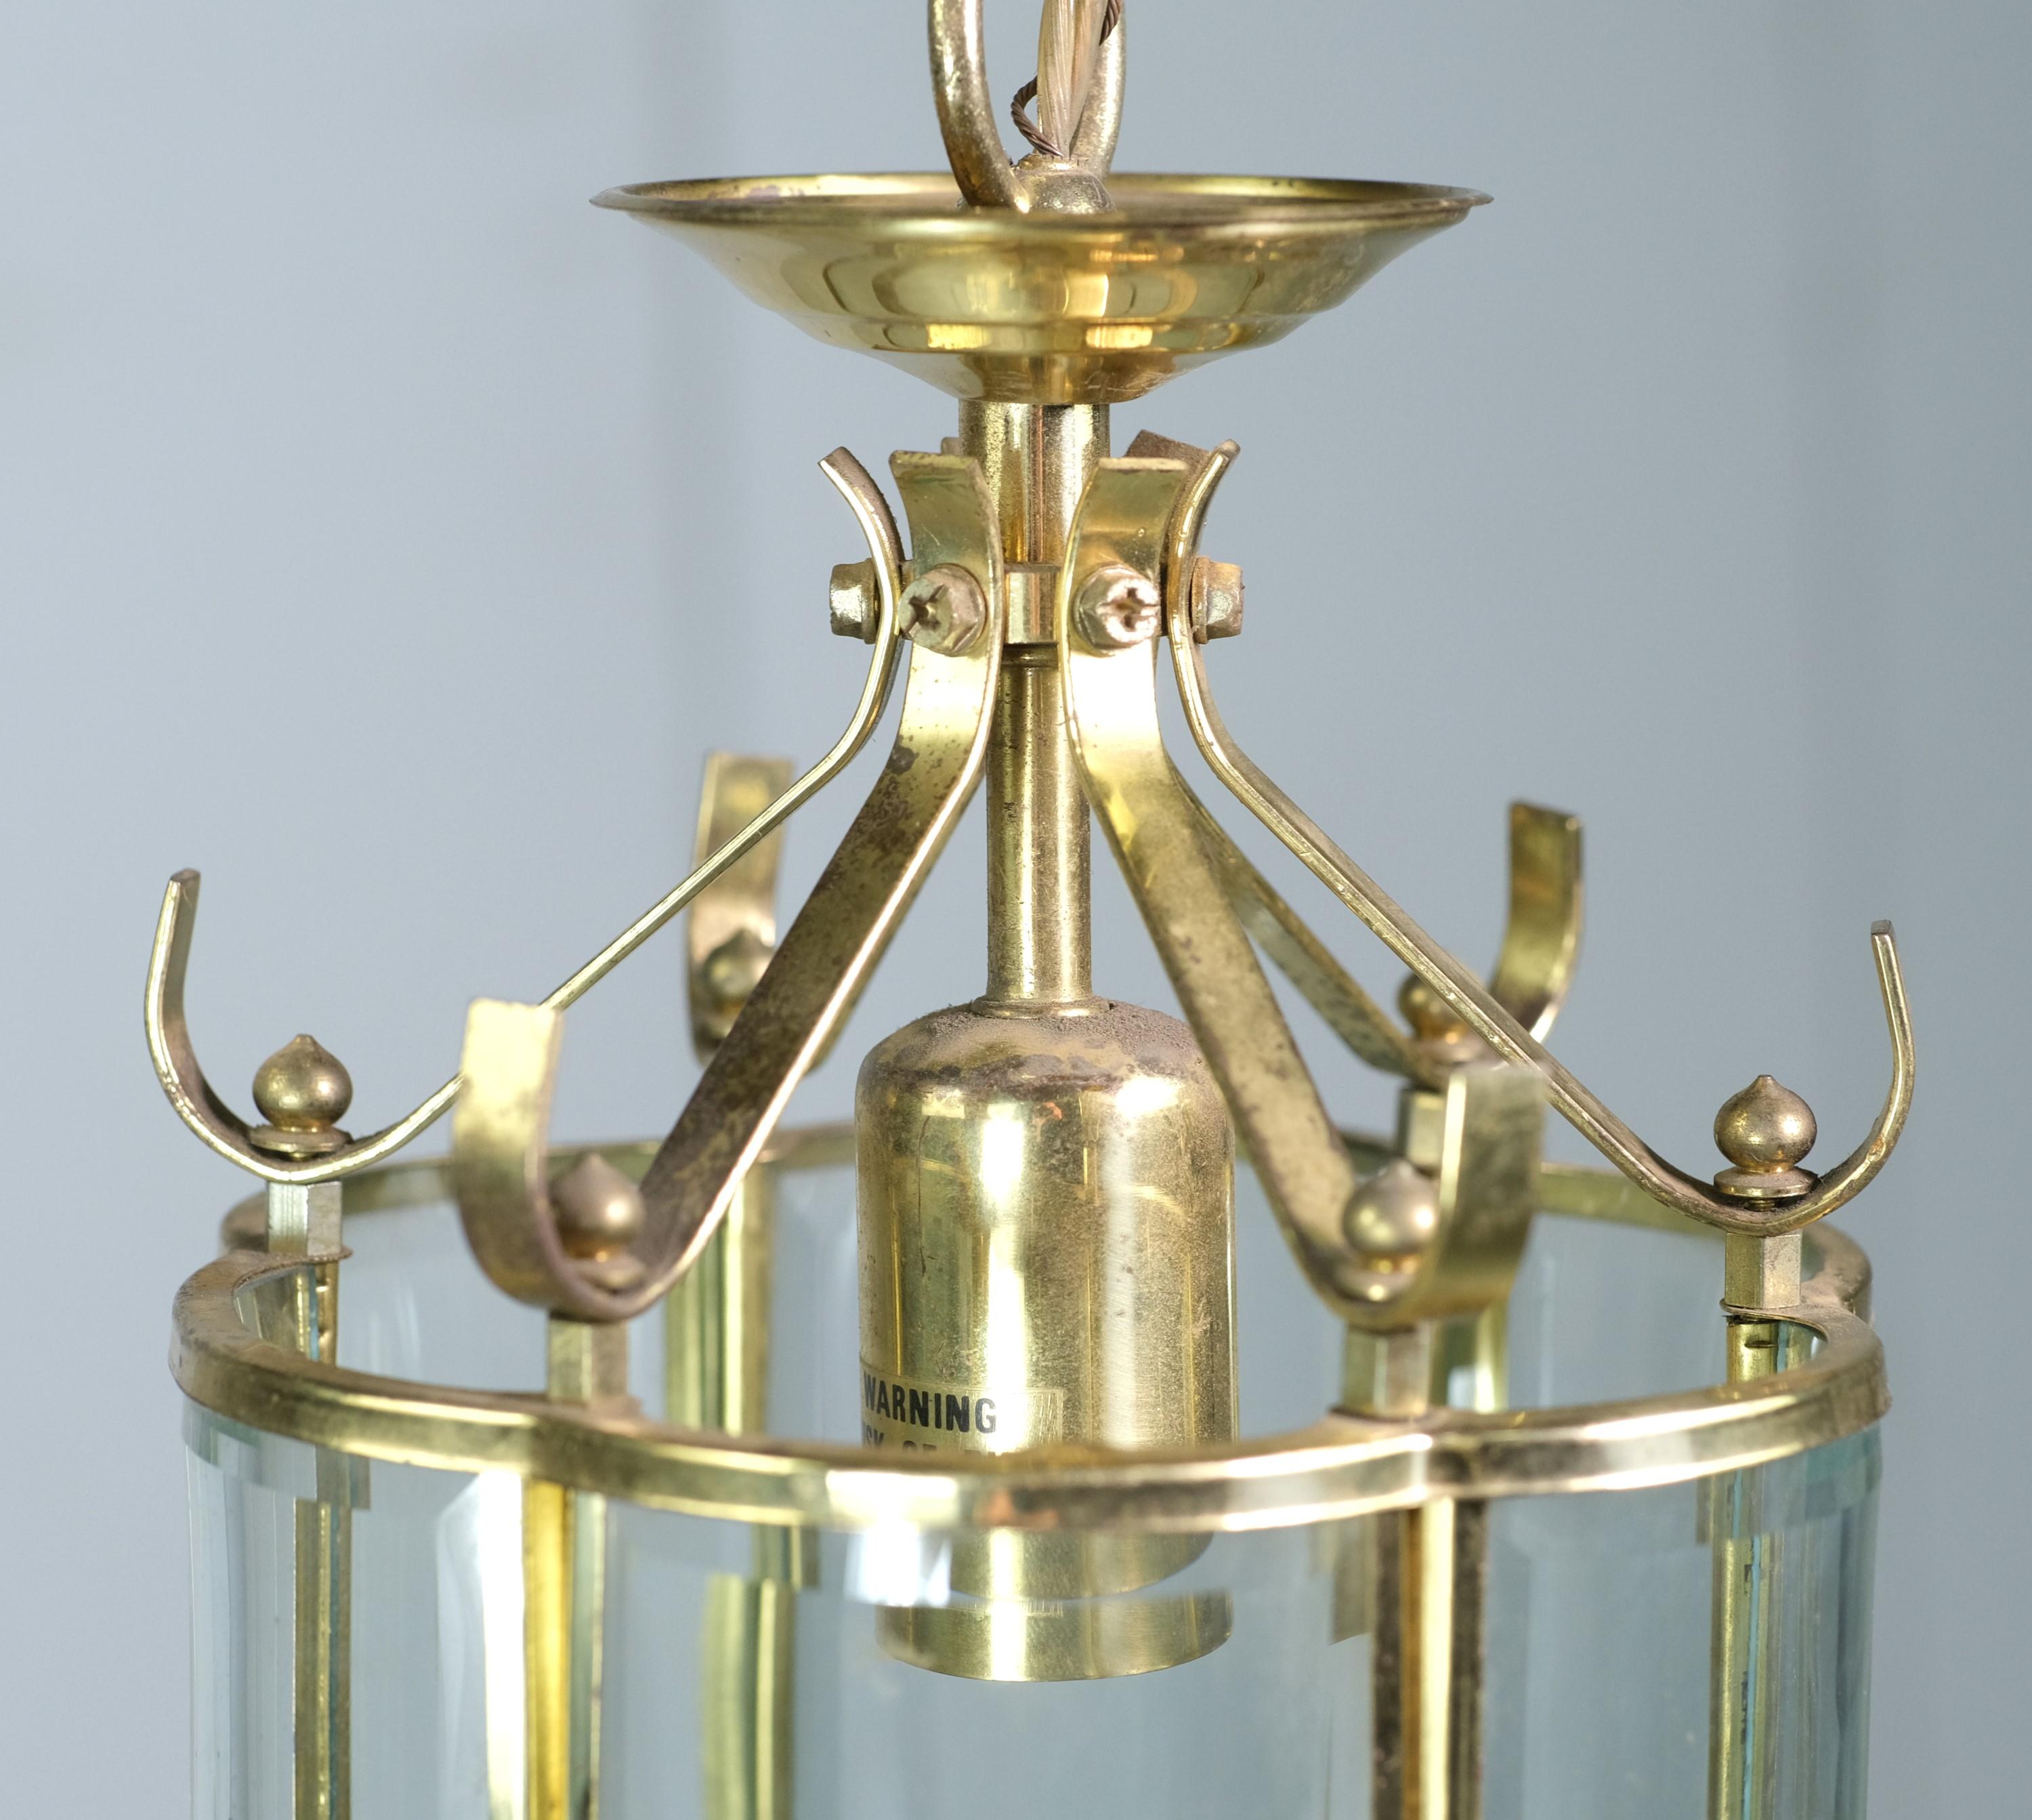 Late 20th century polished brass six sided pendant lantern with clear curved and beveled glass shades. Takes one standard medium base household lightbulb. Cleaned and restored. Please note, this item is located in our Scranton, PA location.